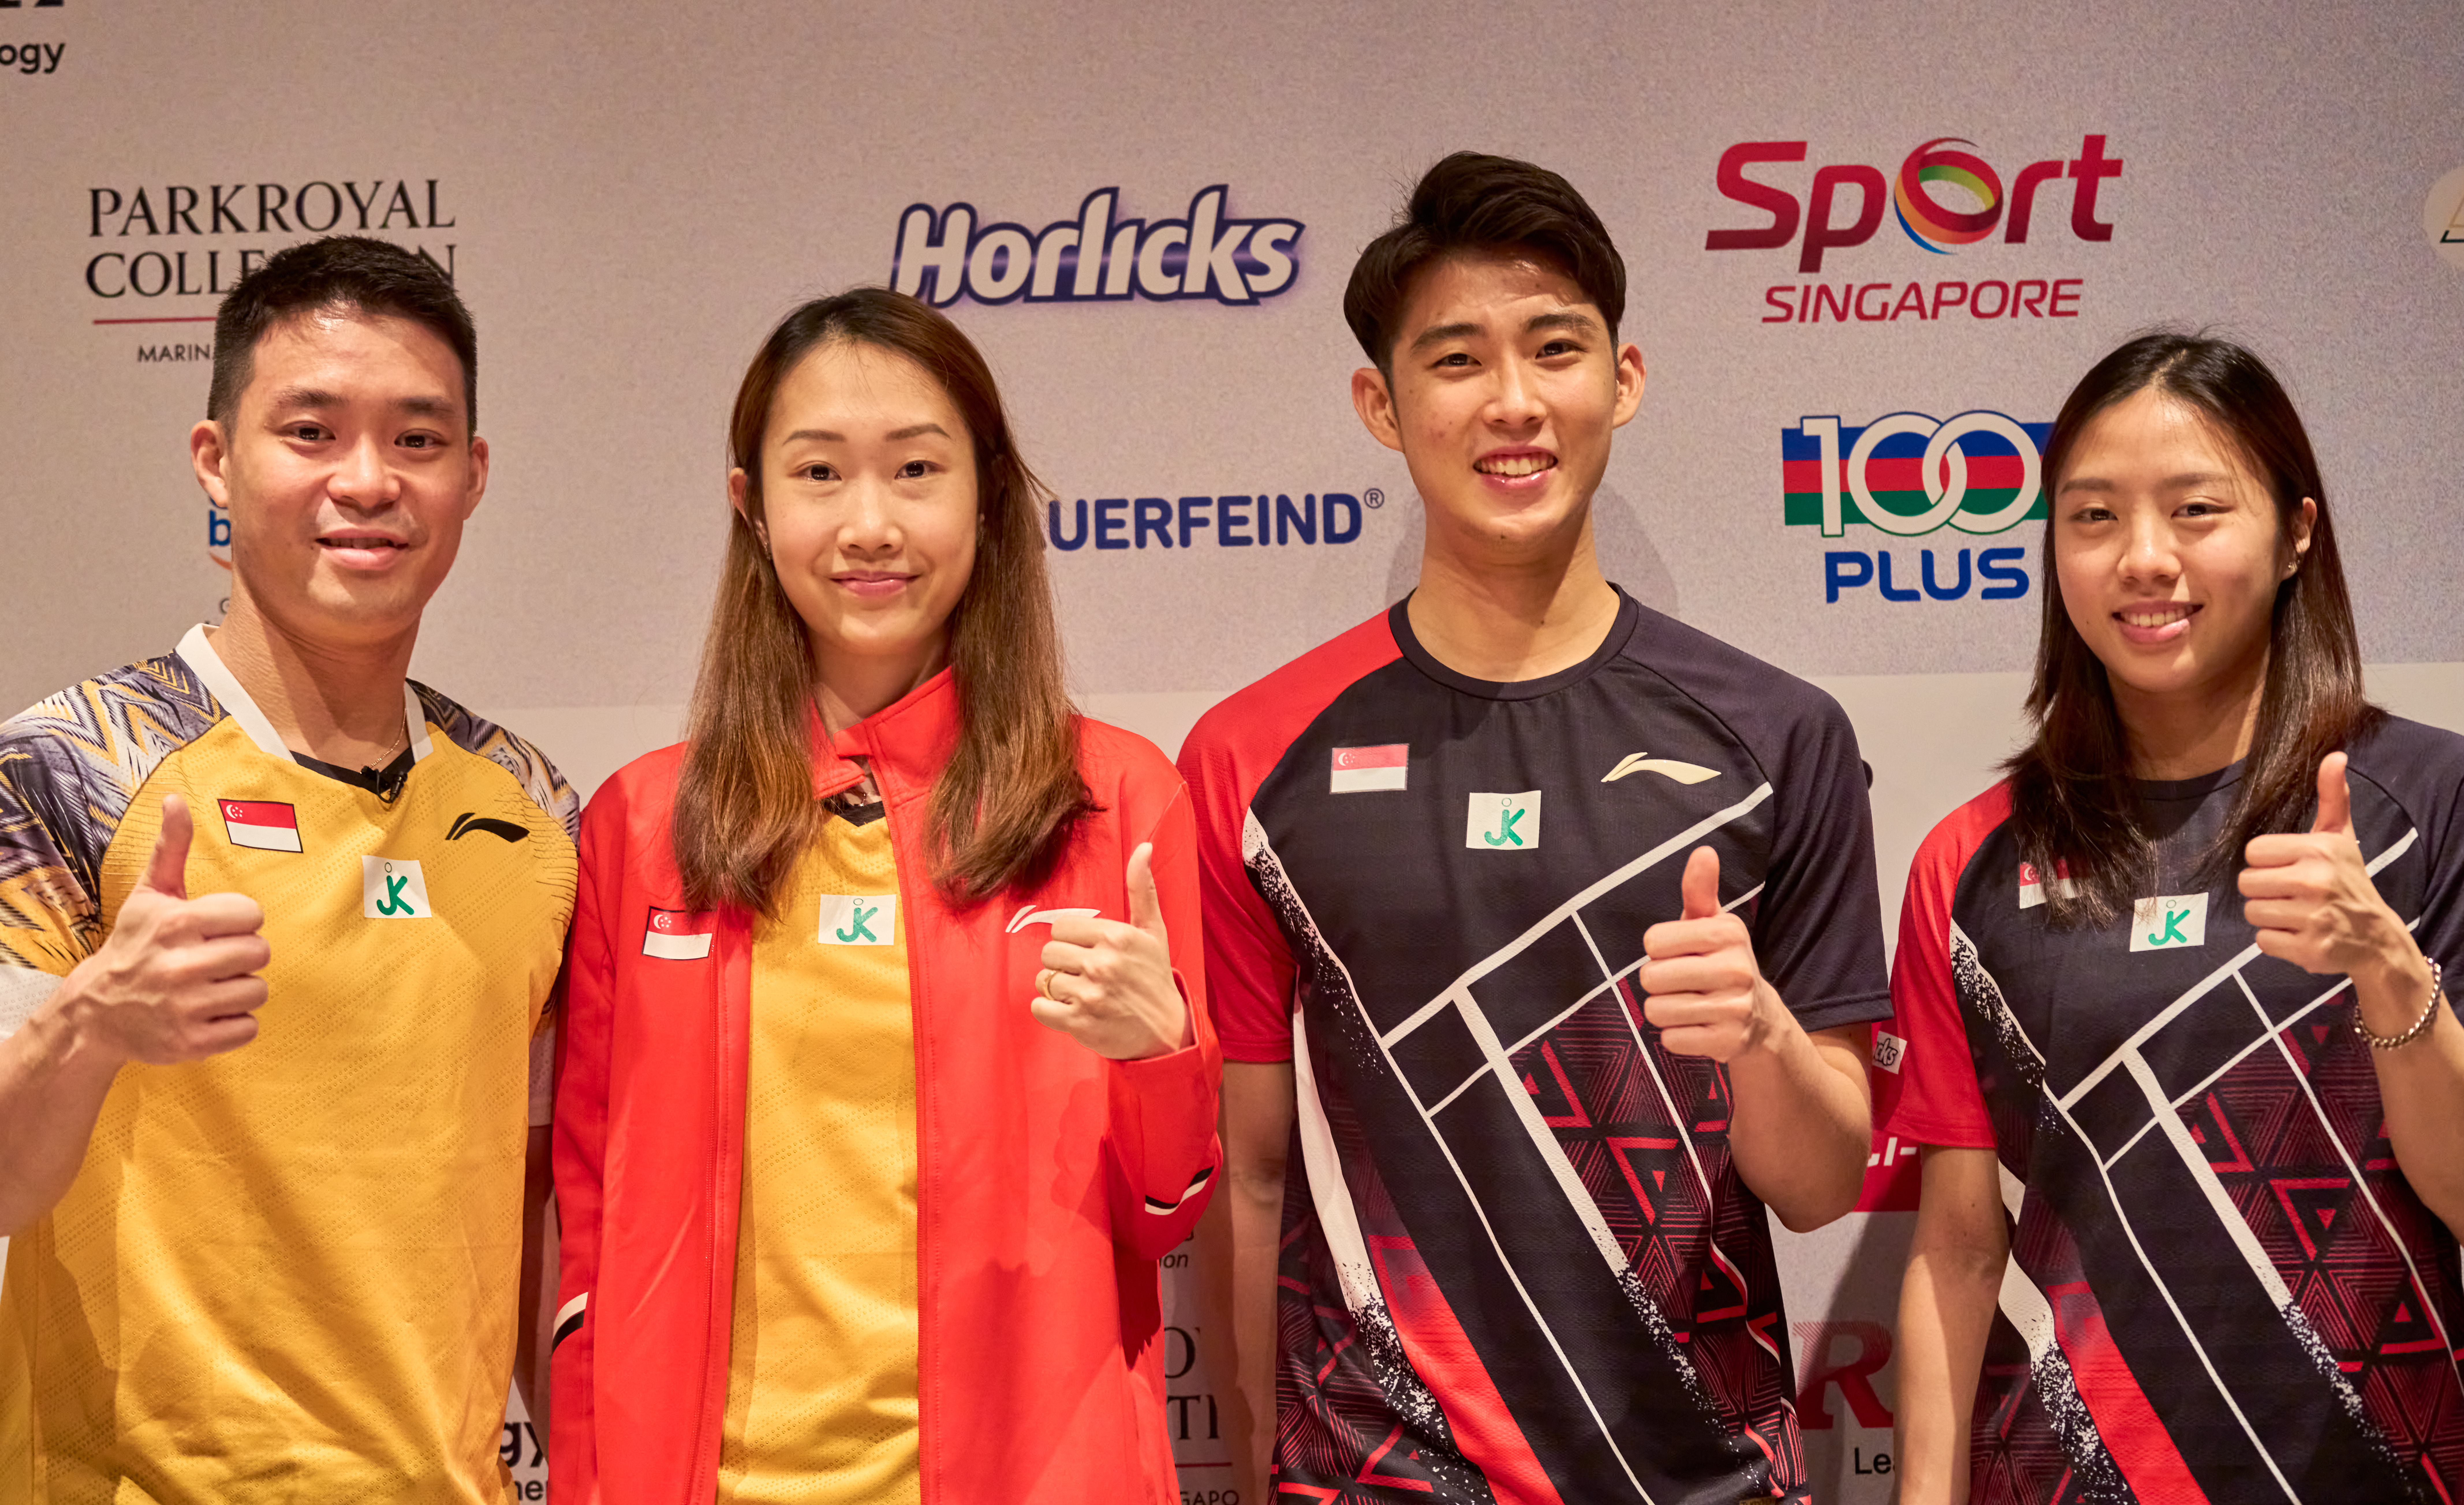 TeamSG Shuttlers are Ready to Compete against World's Best, at KFF Singapore Badminton Open 2023!